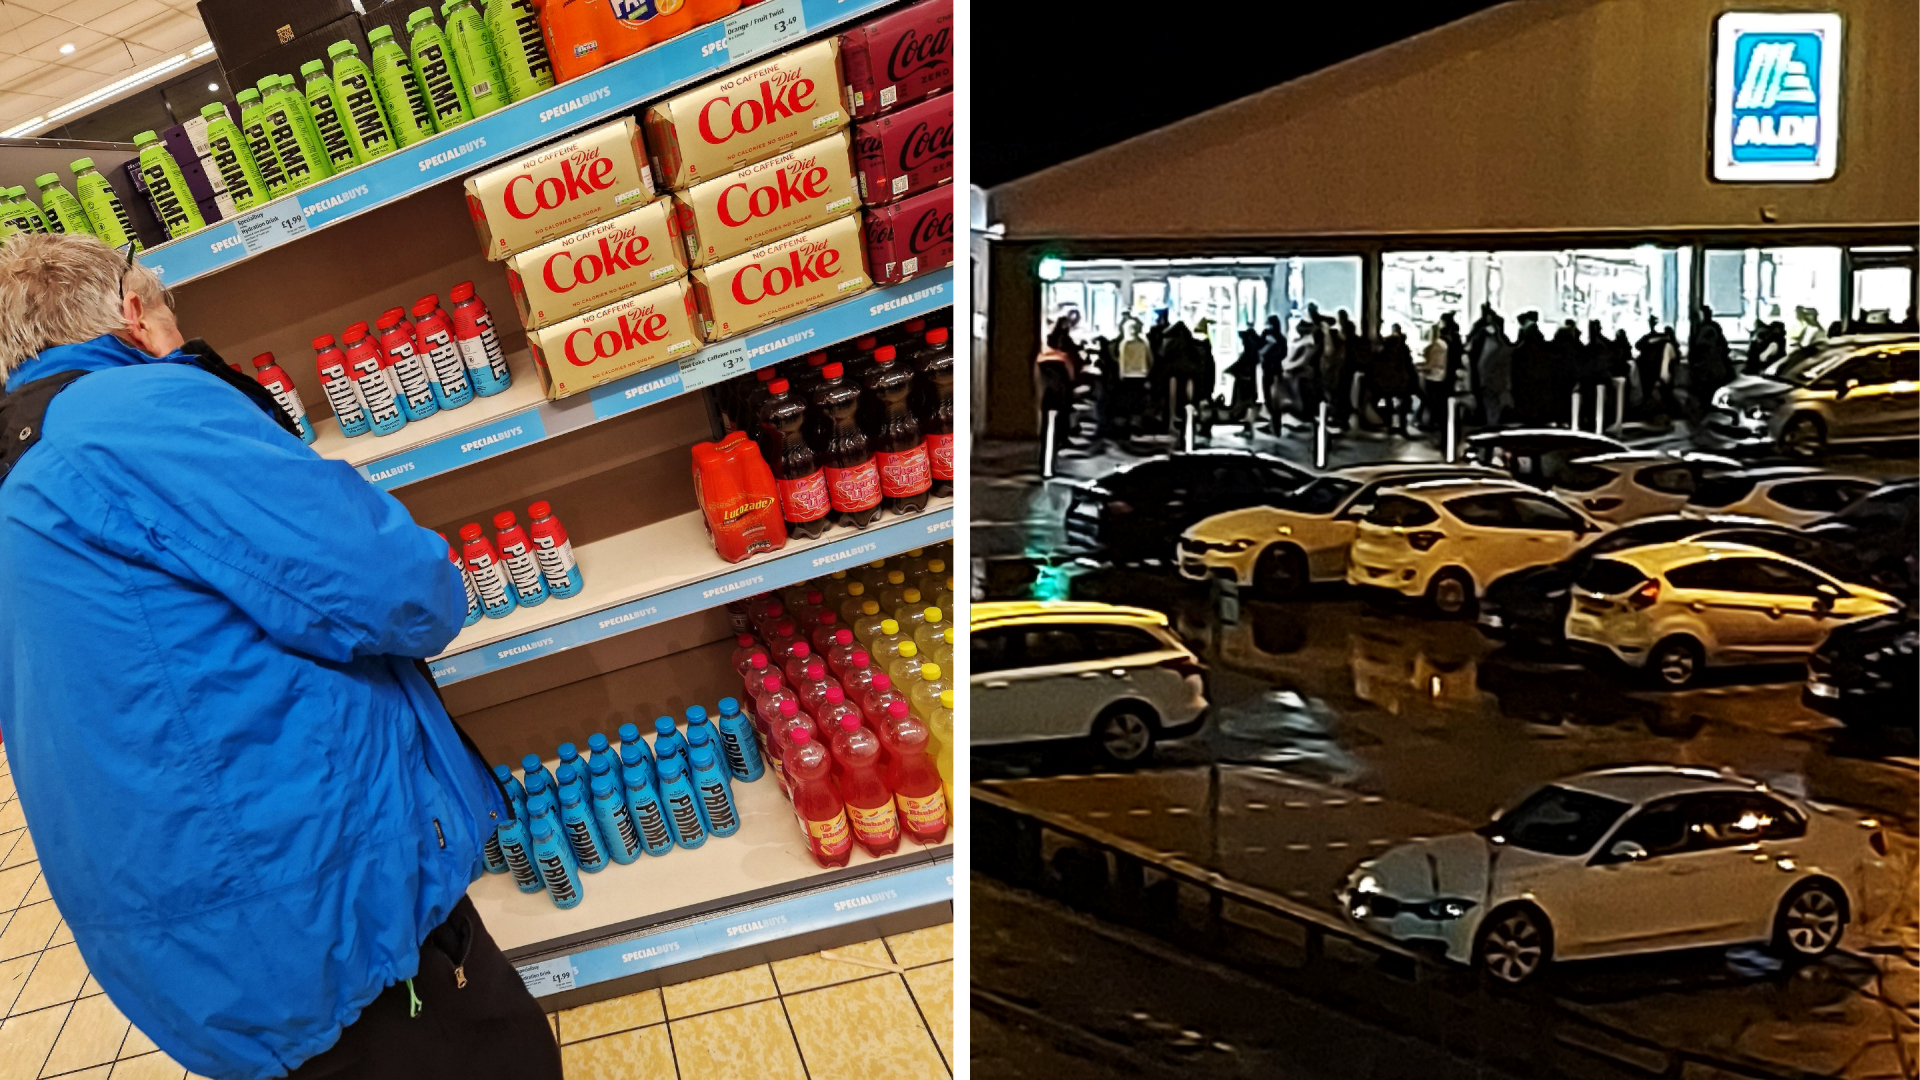 Huge queues have formed at Aldi stores across Scotland as people scrambled to grab bottles before they sold out.